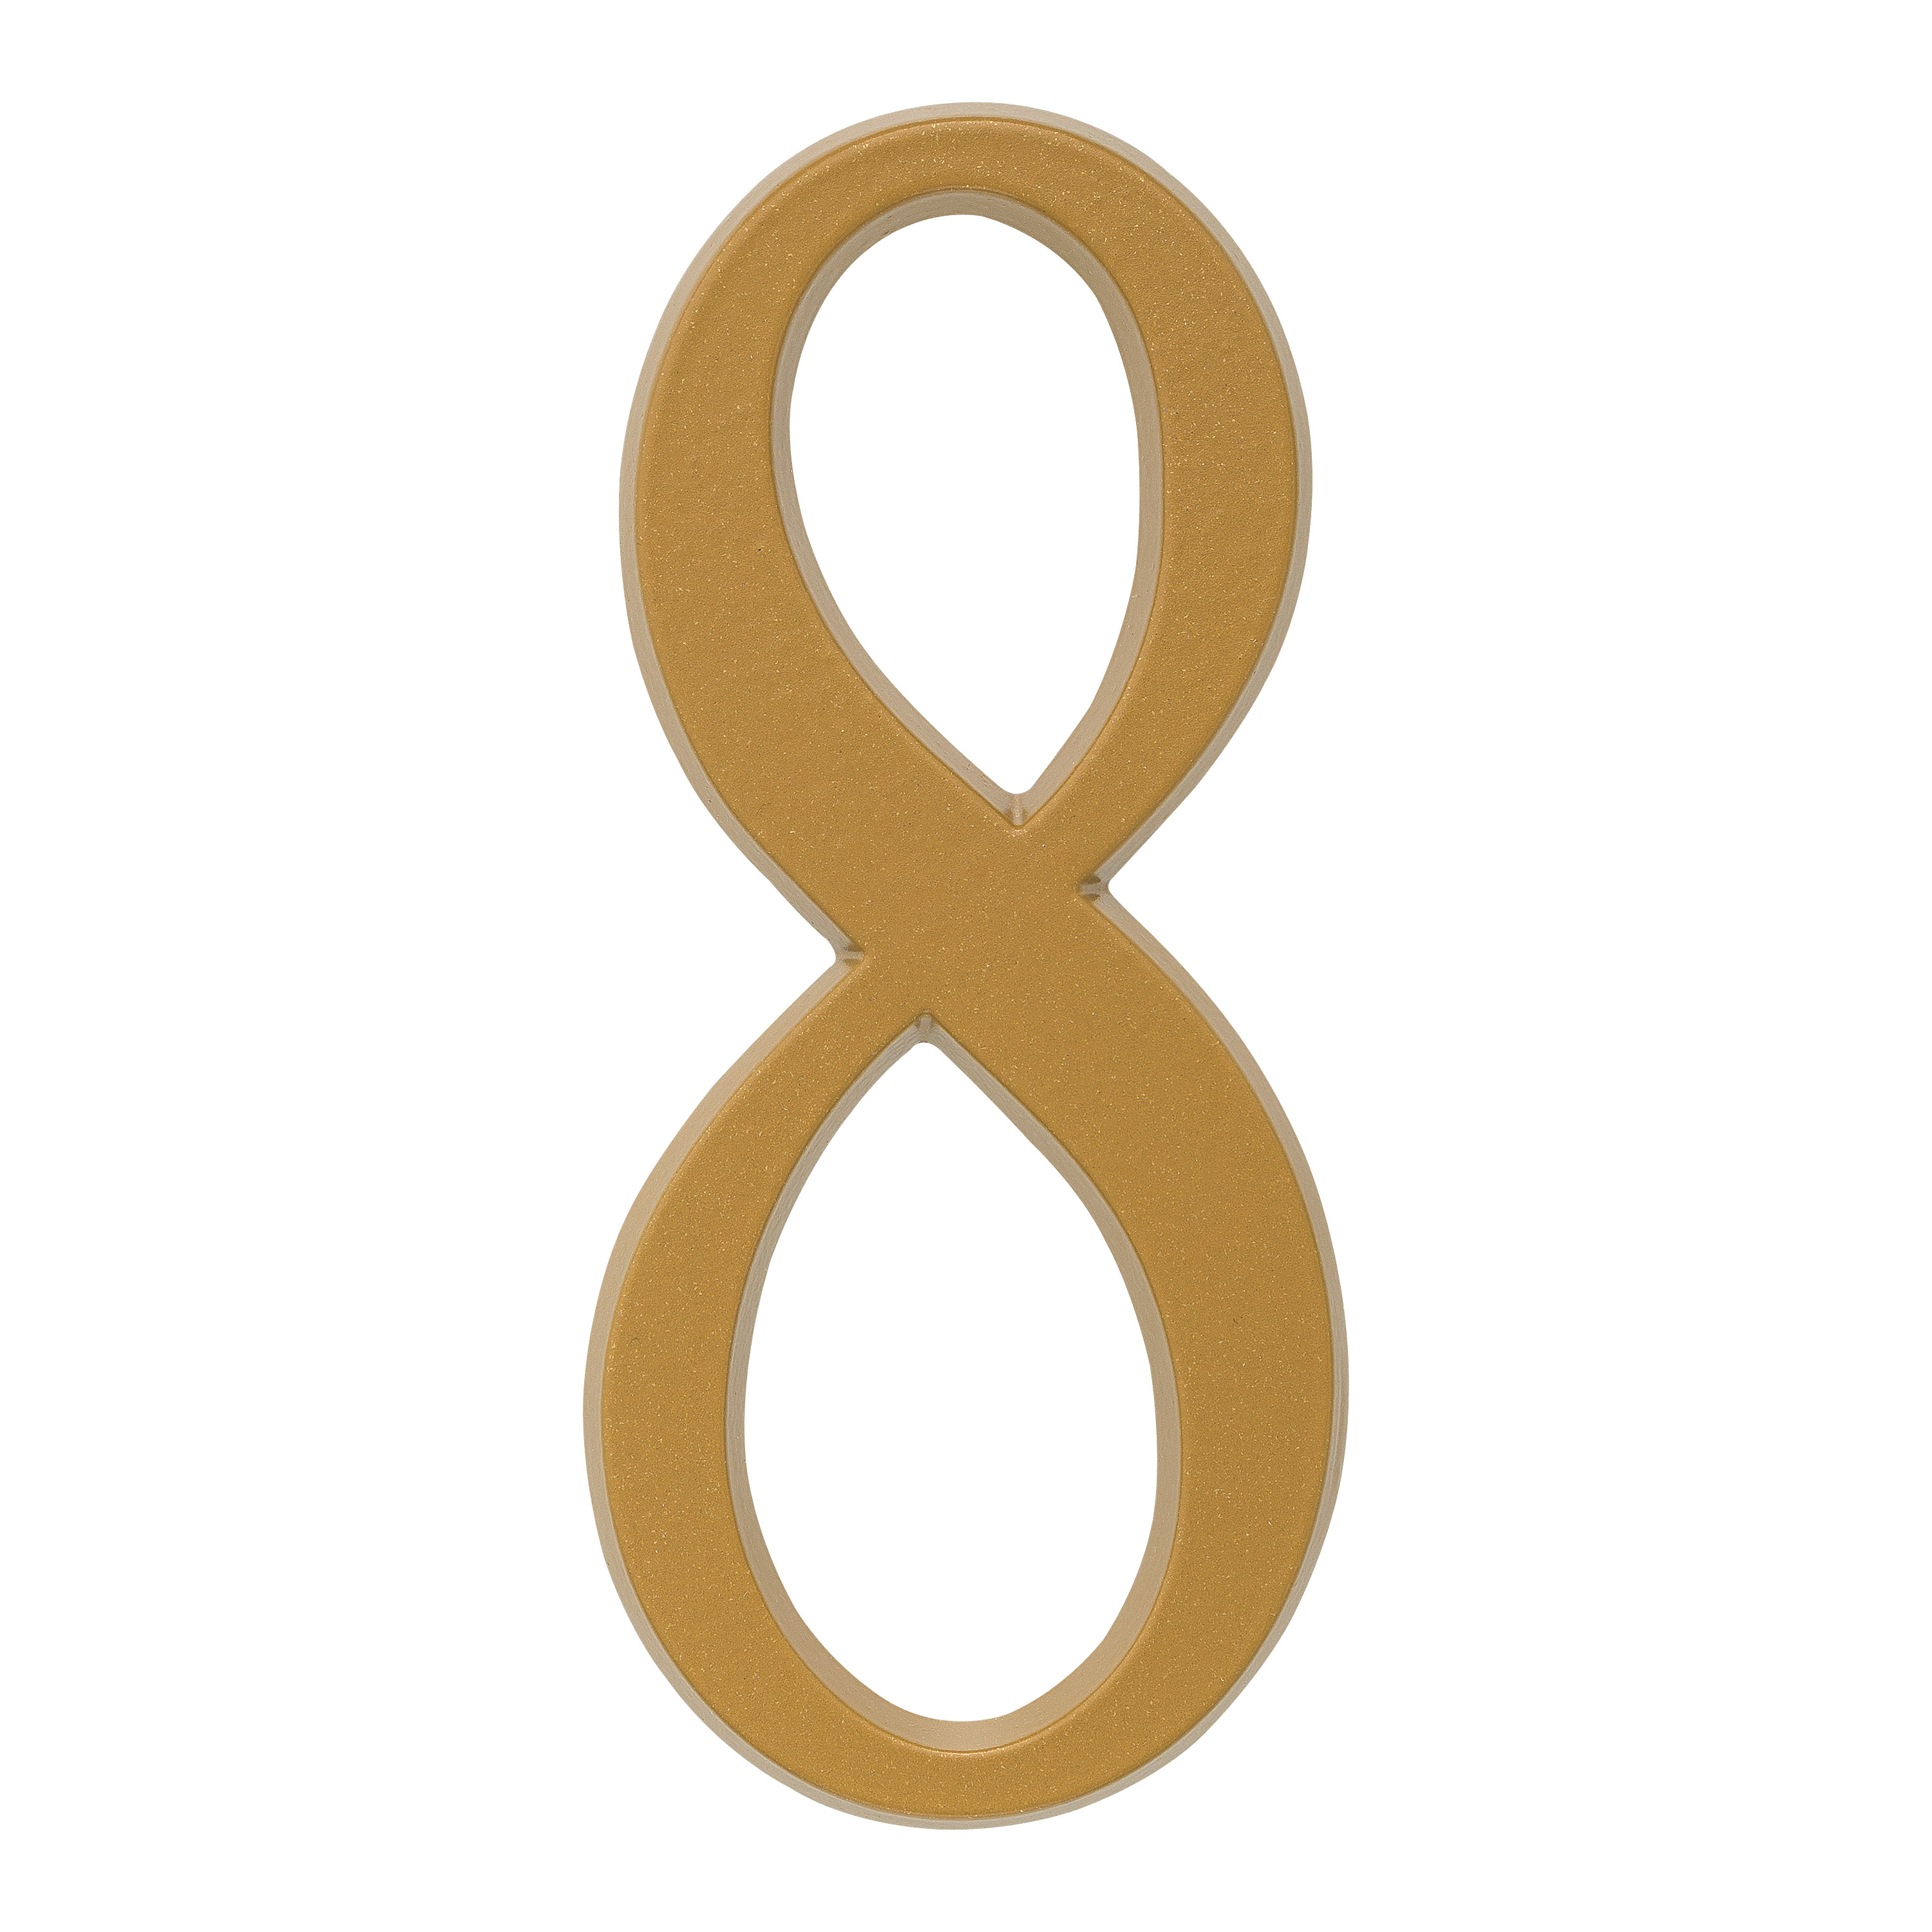 Whitehall 4.75 inch Gold House Address Number - 8